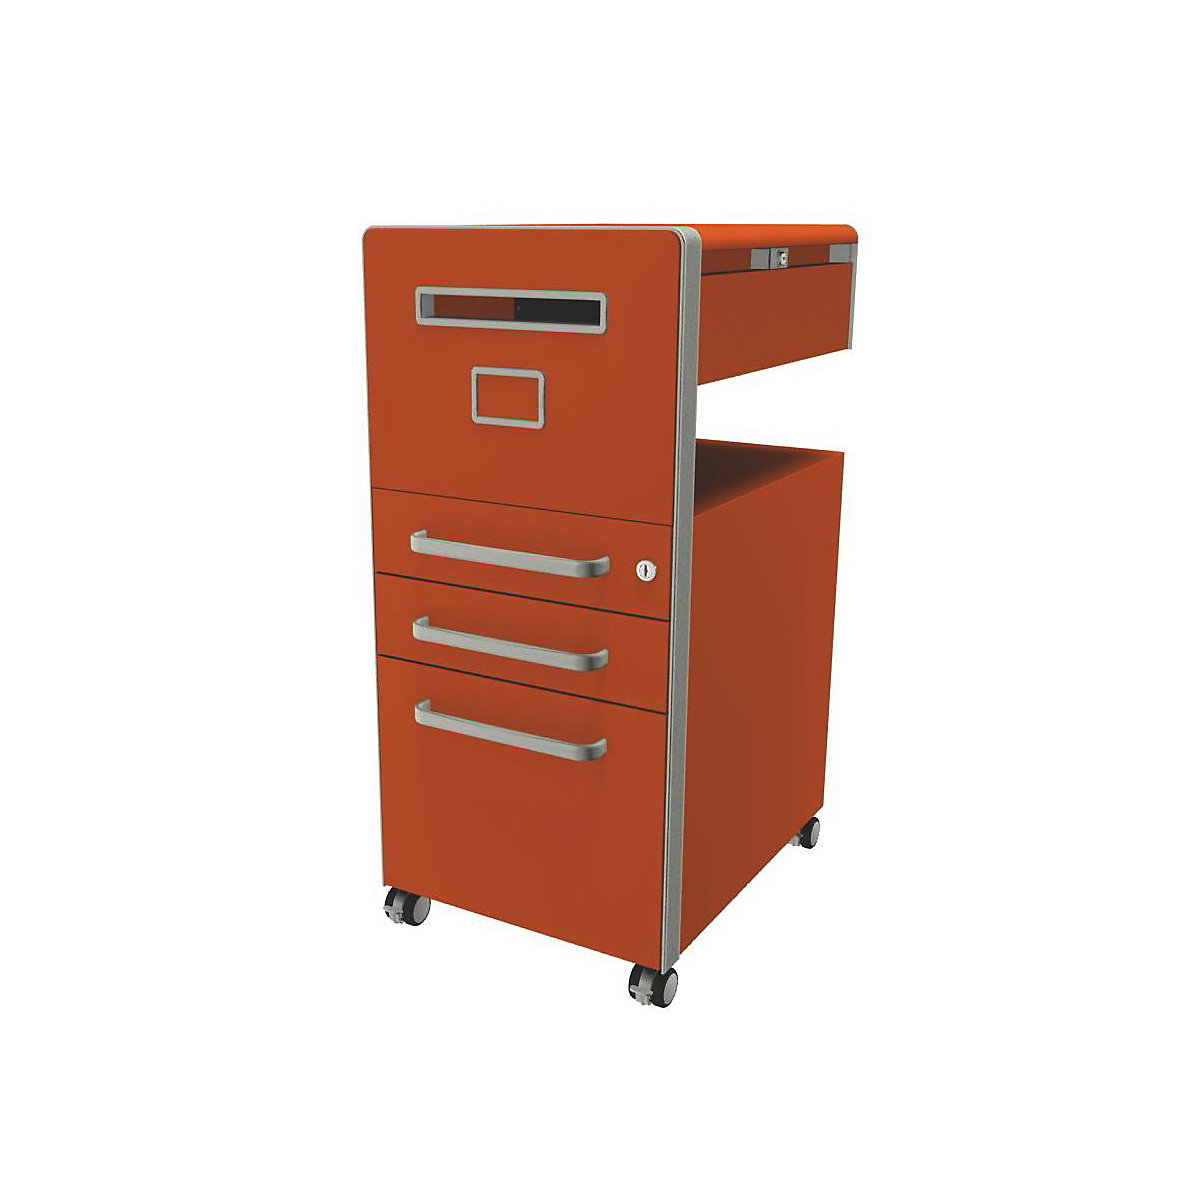 Bite™ pedestal furniture, with 1 whiteboard, opens on the left side – BISLEY, with 2 universal drawers, 1 suspension file drawer, orange-22